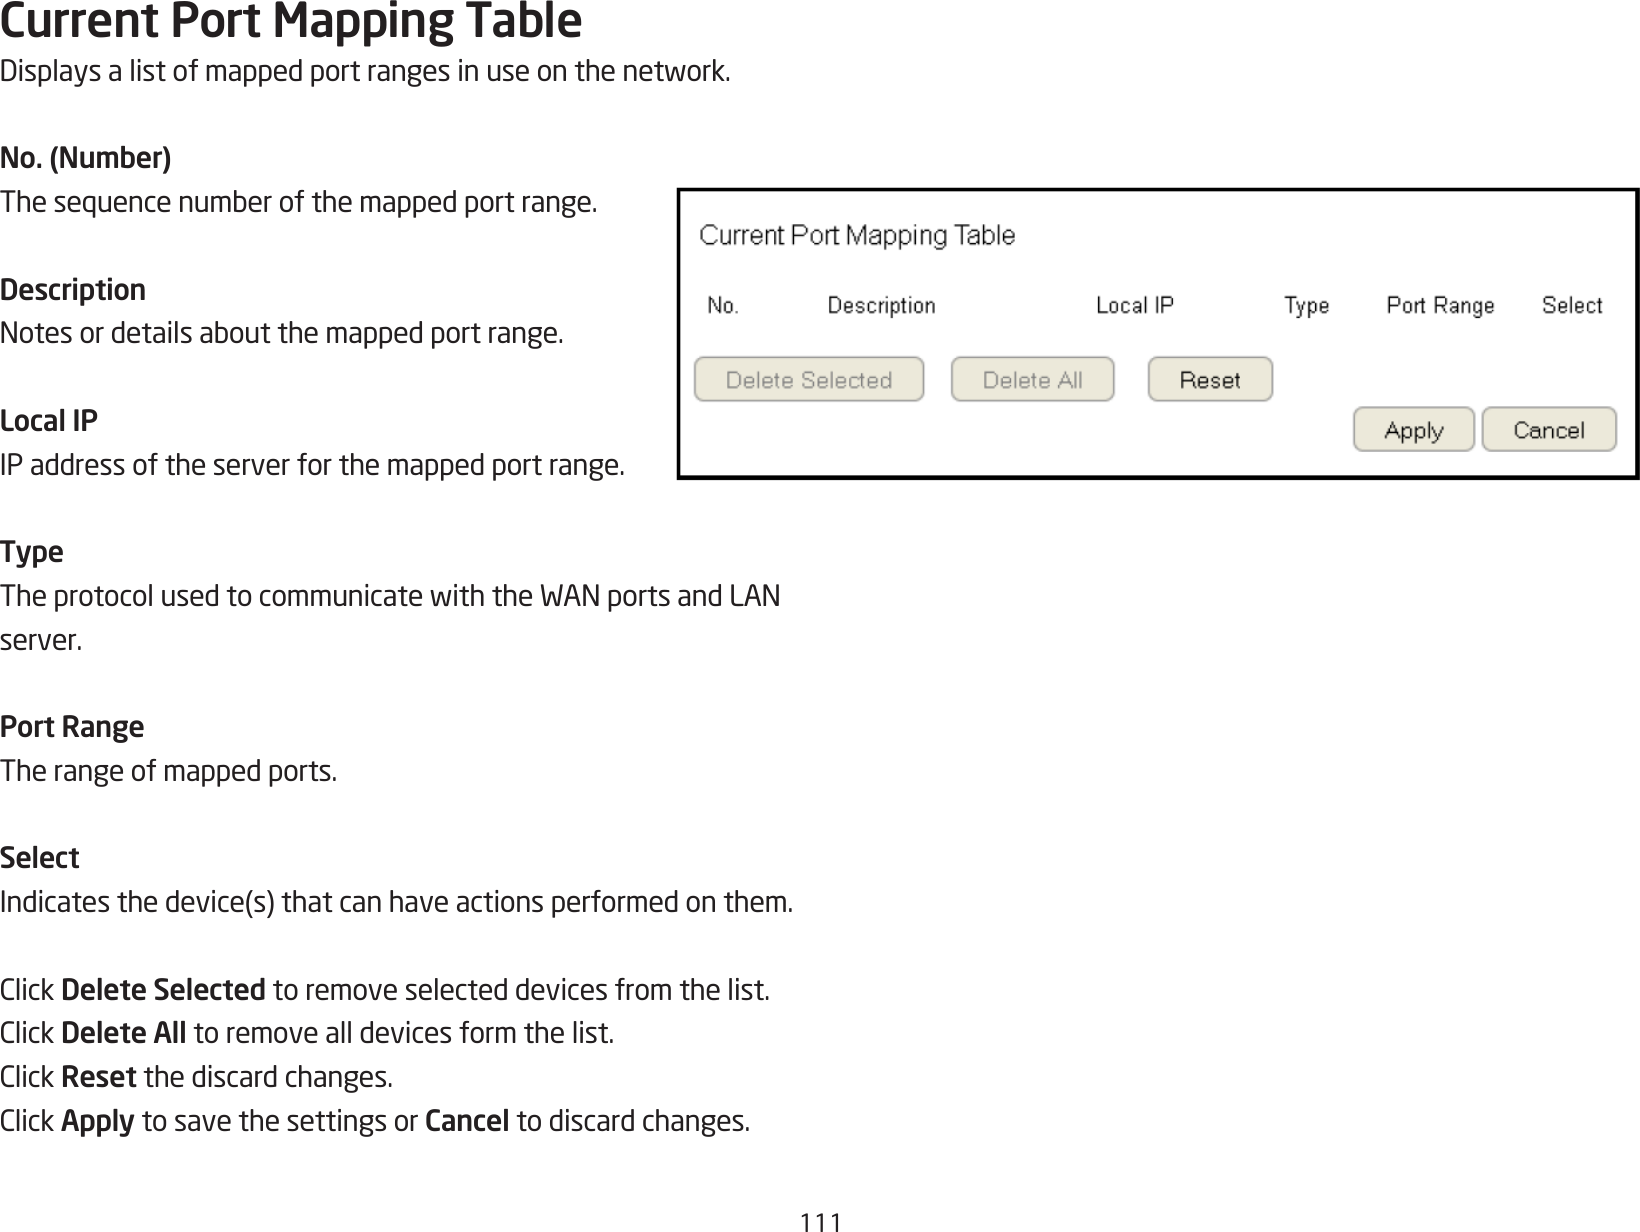 111Current Port Mapping TableDisplaysalistofmappedportrangesinuseonthenetwork.No. (Number)Thesequencenumberofthemappedportrange.DescriptionNotesordetailsaboutthemappedportrange.Local IPIP address of the server for the mapped port range.TypeTheprotocolusedtocommunicatewiththeWANportsandLANserver.Port RangeThe range of mapped ports.SelectIndicatesthedevice(s)thatcanhaveactionsperformedonthem.ClickDelete Selected to remove selected devices from the list.ClickDelete All to remove all devices form the list.ClickReset the discard changes.ClickApply to save the settings or Cancel to discard changes.